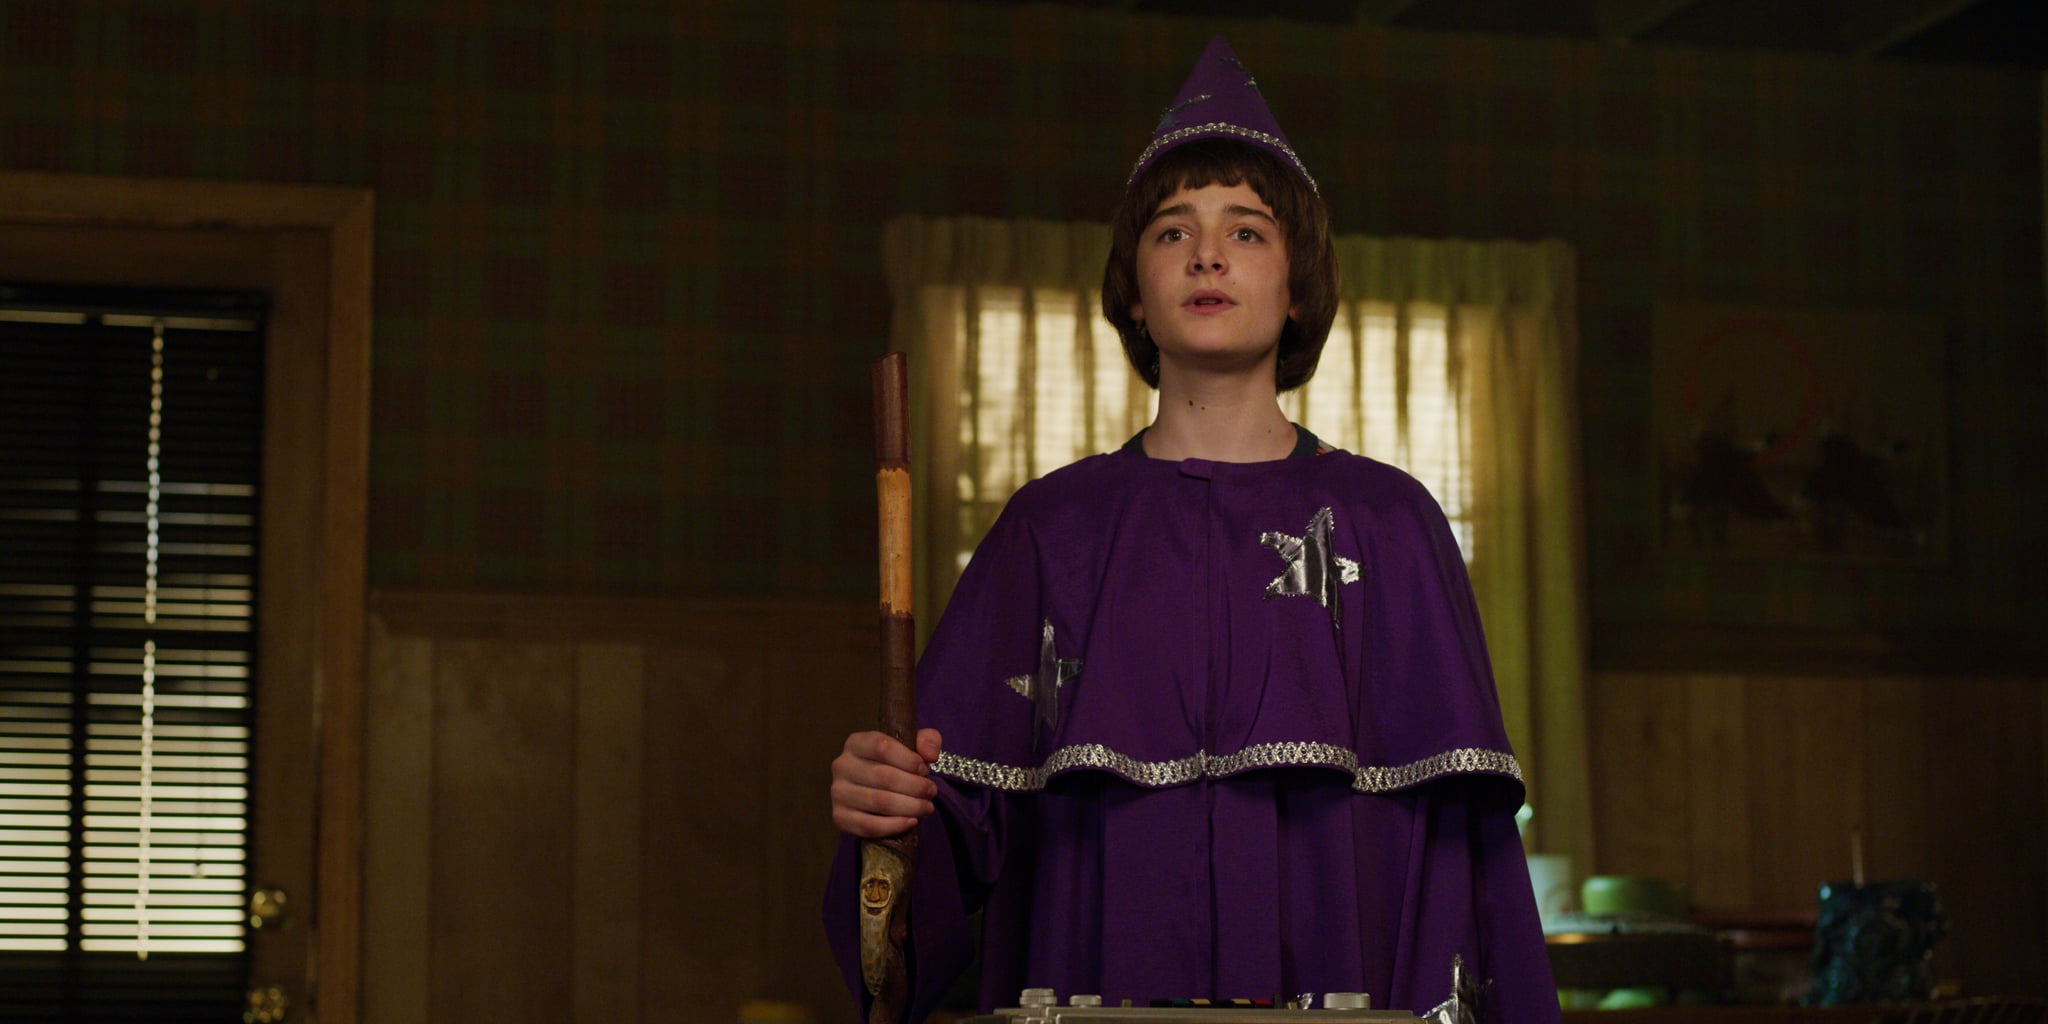 Will Wizard Outfit Adult Mens Costume NEW Stranger Things Season 3 